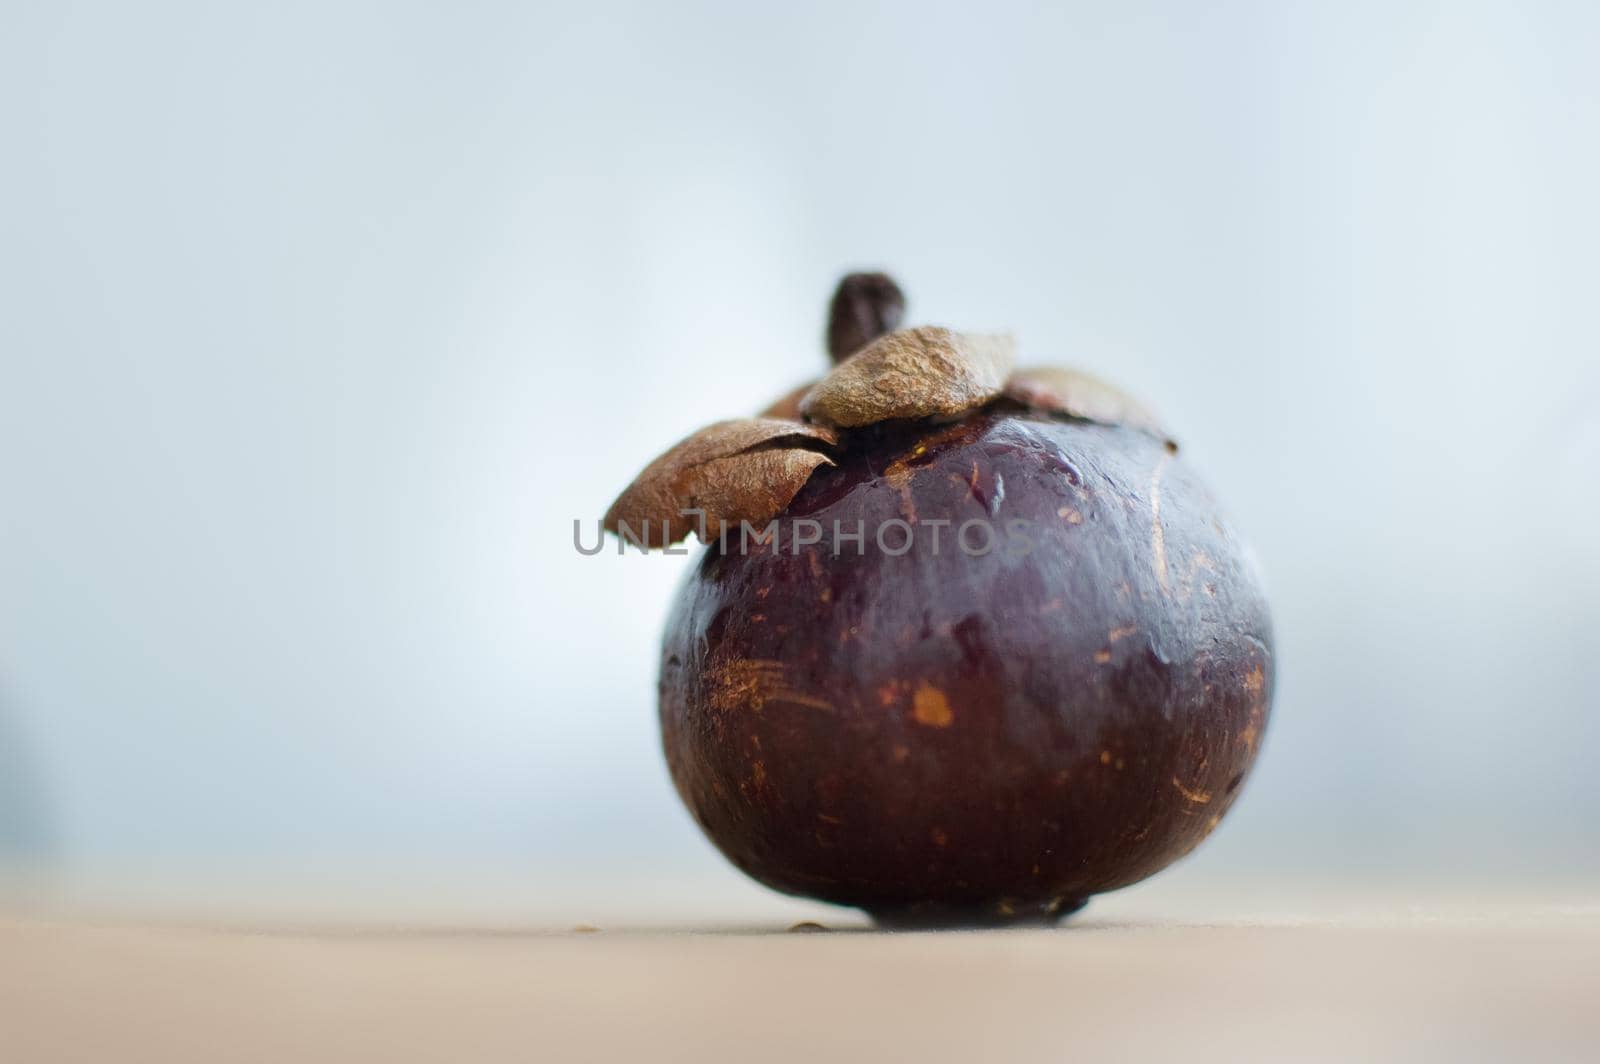 Mangosteen fruit with dark purple skin on wooden table, the queen of exotic fruits. Healthy eating concept.